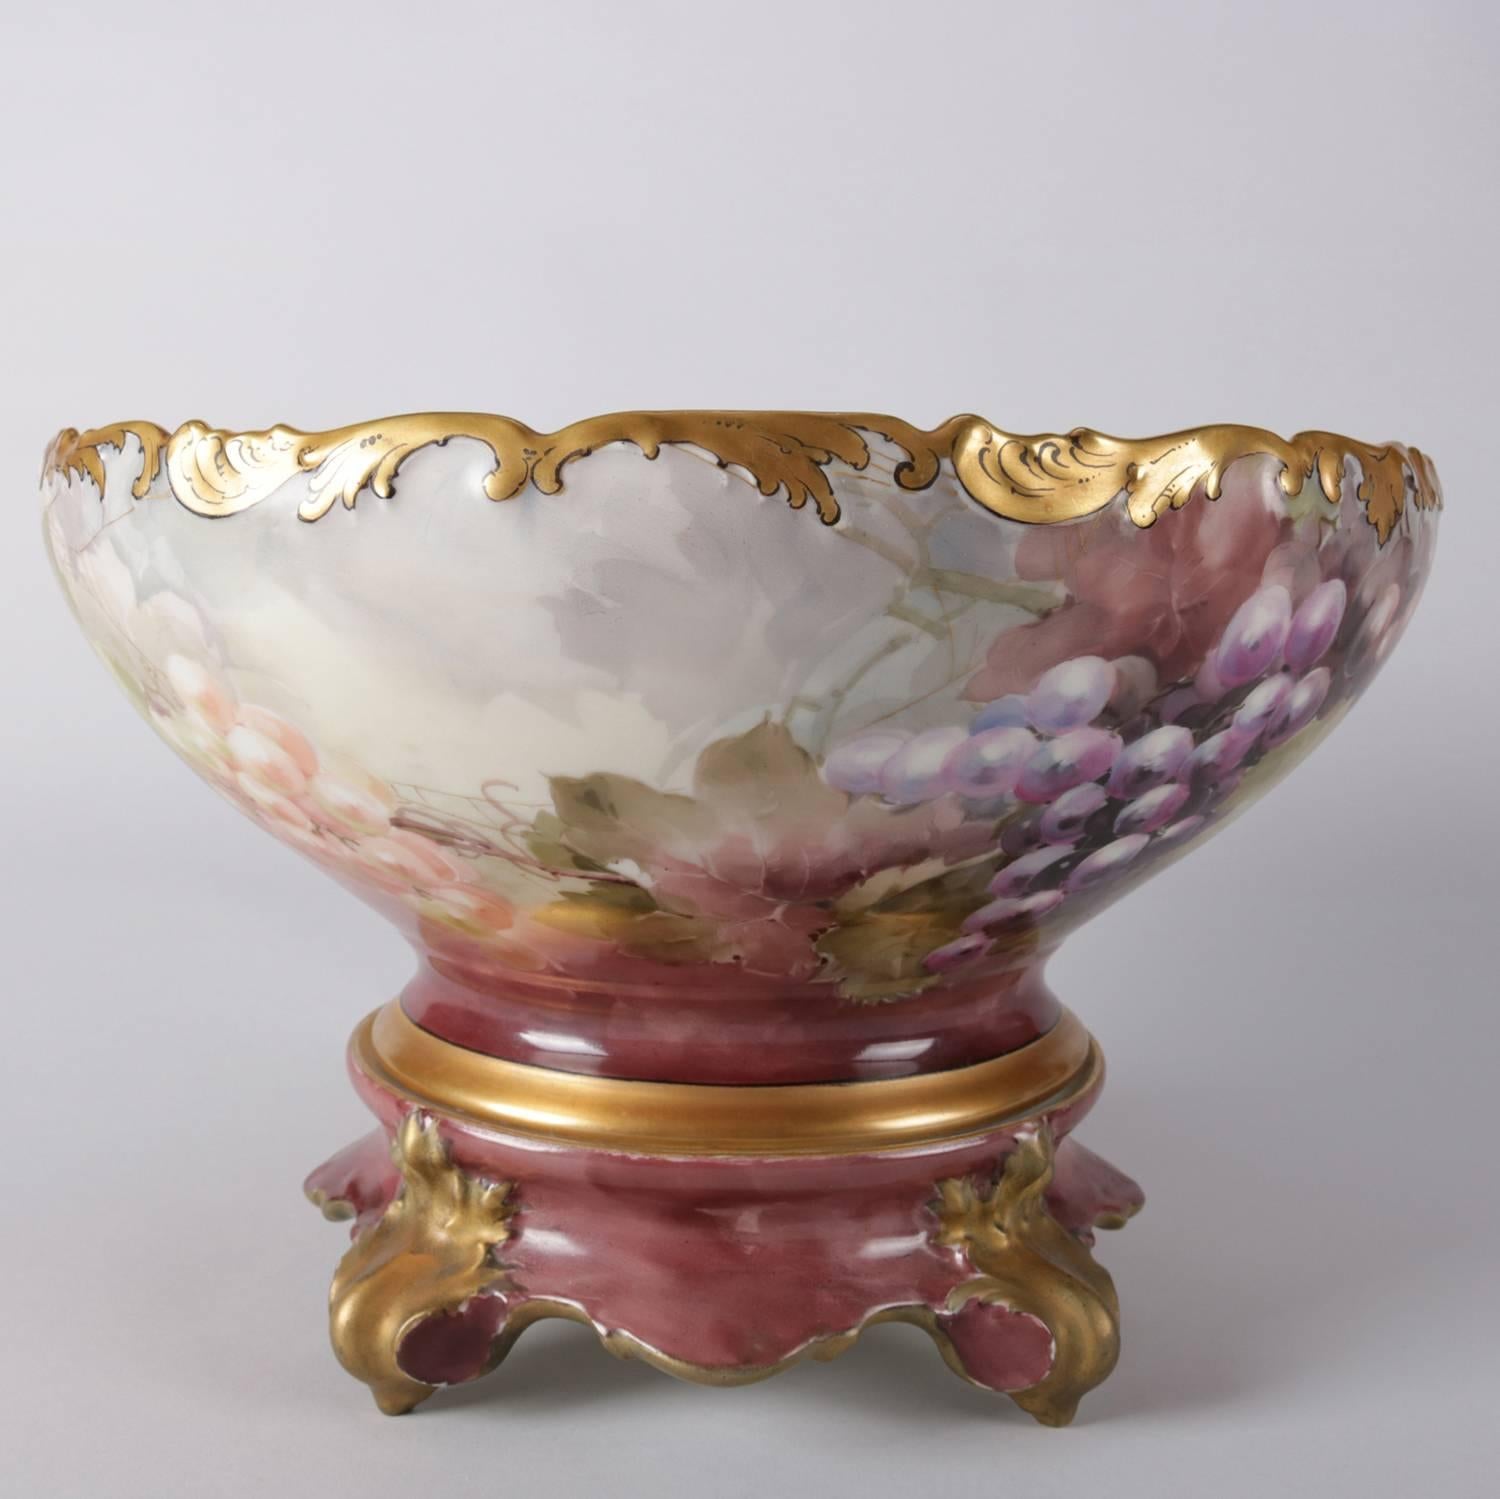 Antique French Limoges porcelain punch bowl by Tress manes Vogt T&V features grape and leaf all over decoration with heavy gilt accents and is seated on scroll for gilt feet, inside also with grape and leaf, maker stamp on base, 19th